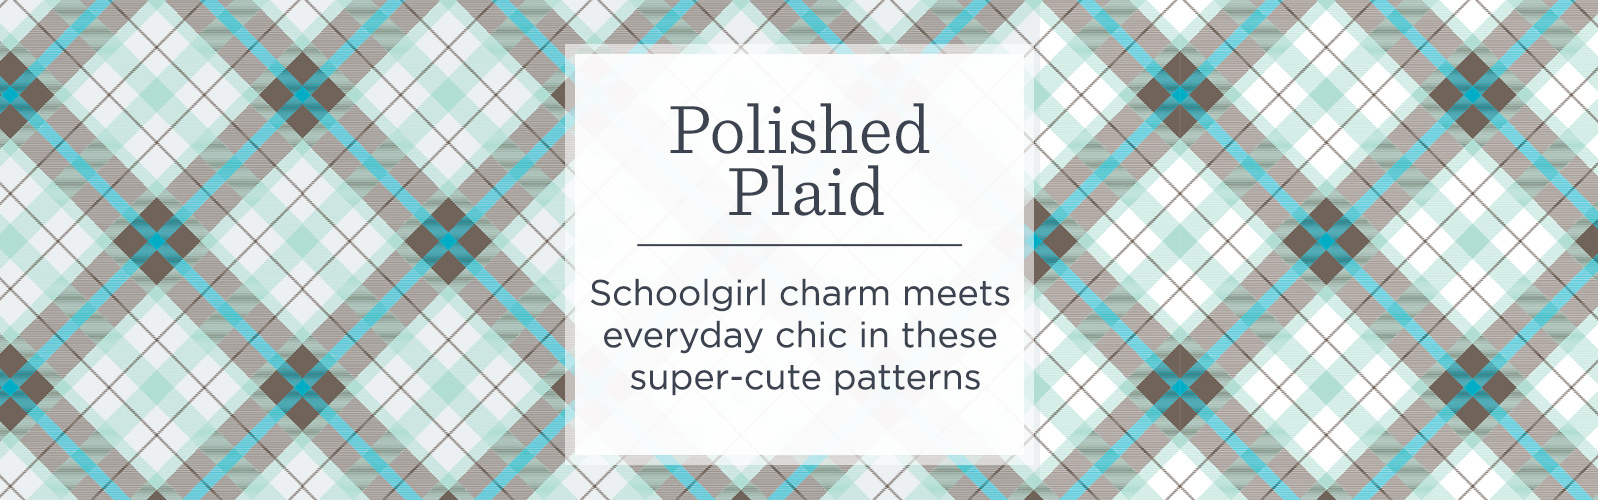 Polished Plaid. Schoolgirl charm meets everyday chic in these super-cute patterns